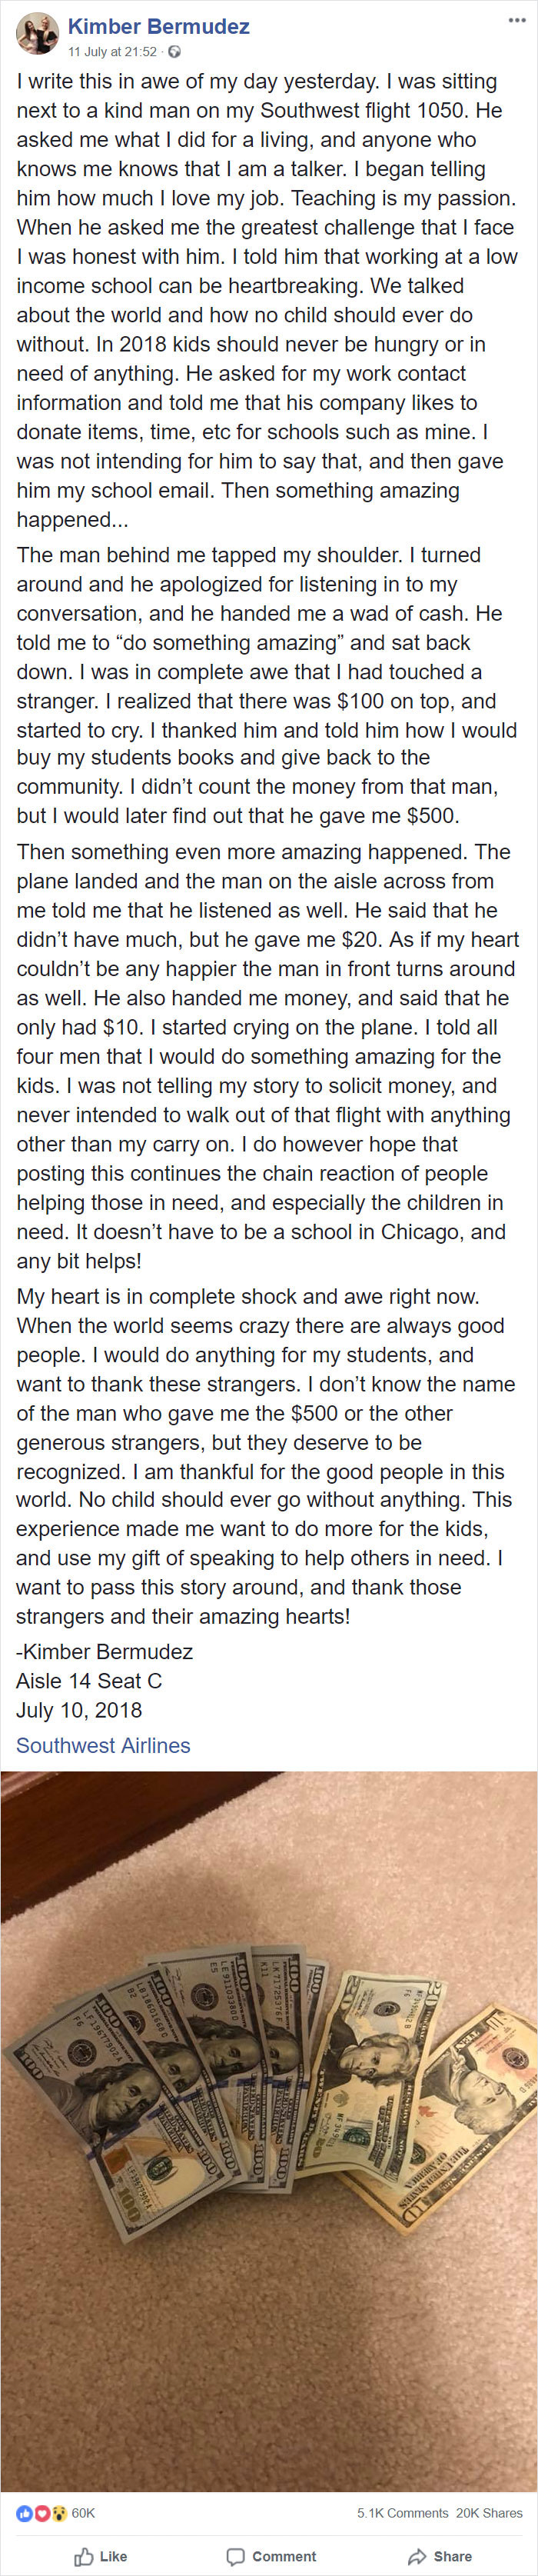 This Teacher On A Plane Talked About Her Low-Income Students. Passengers Overheard And Gave Her More Than $500 In Cash